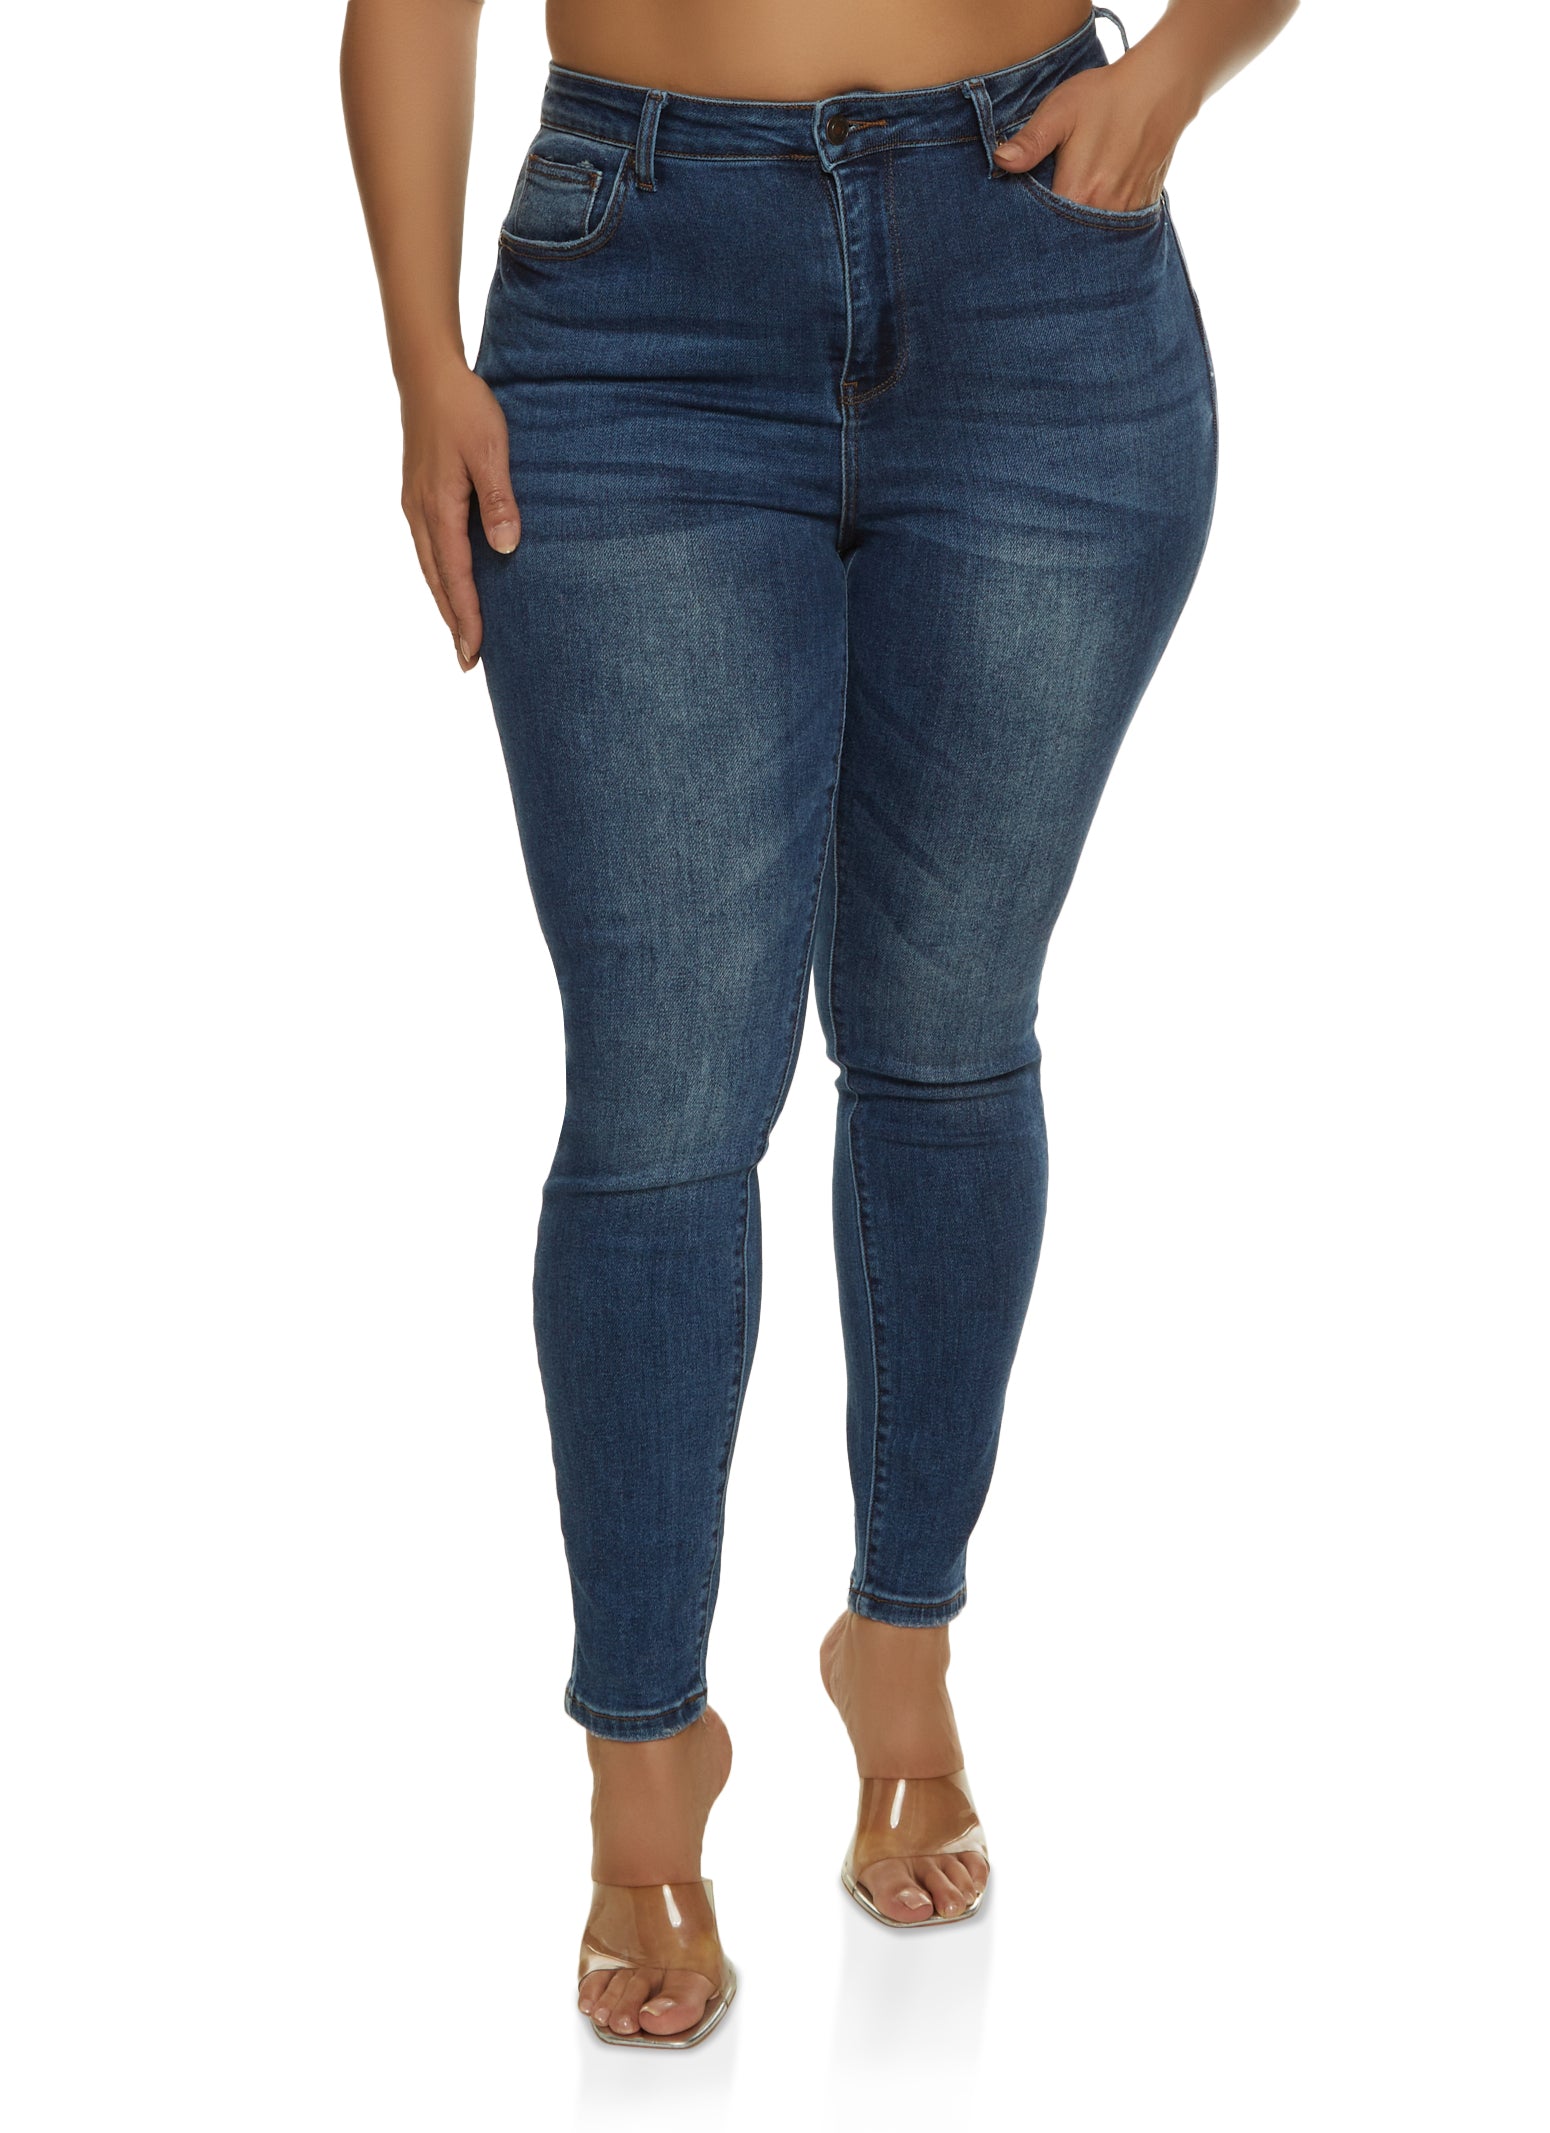 Rainbow Shops Womens Plus Size WAX Whiskered High Waisted Jeans